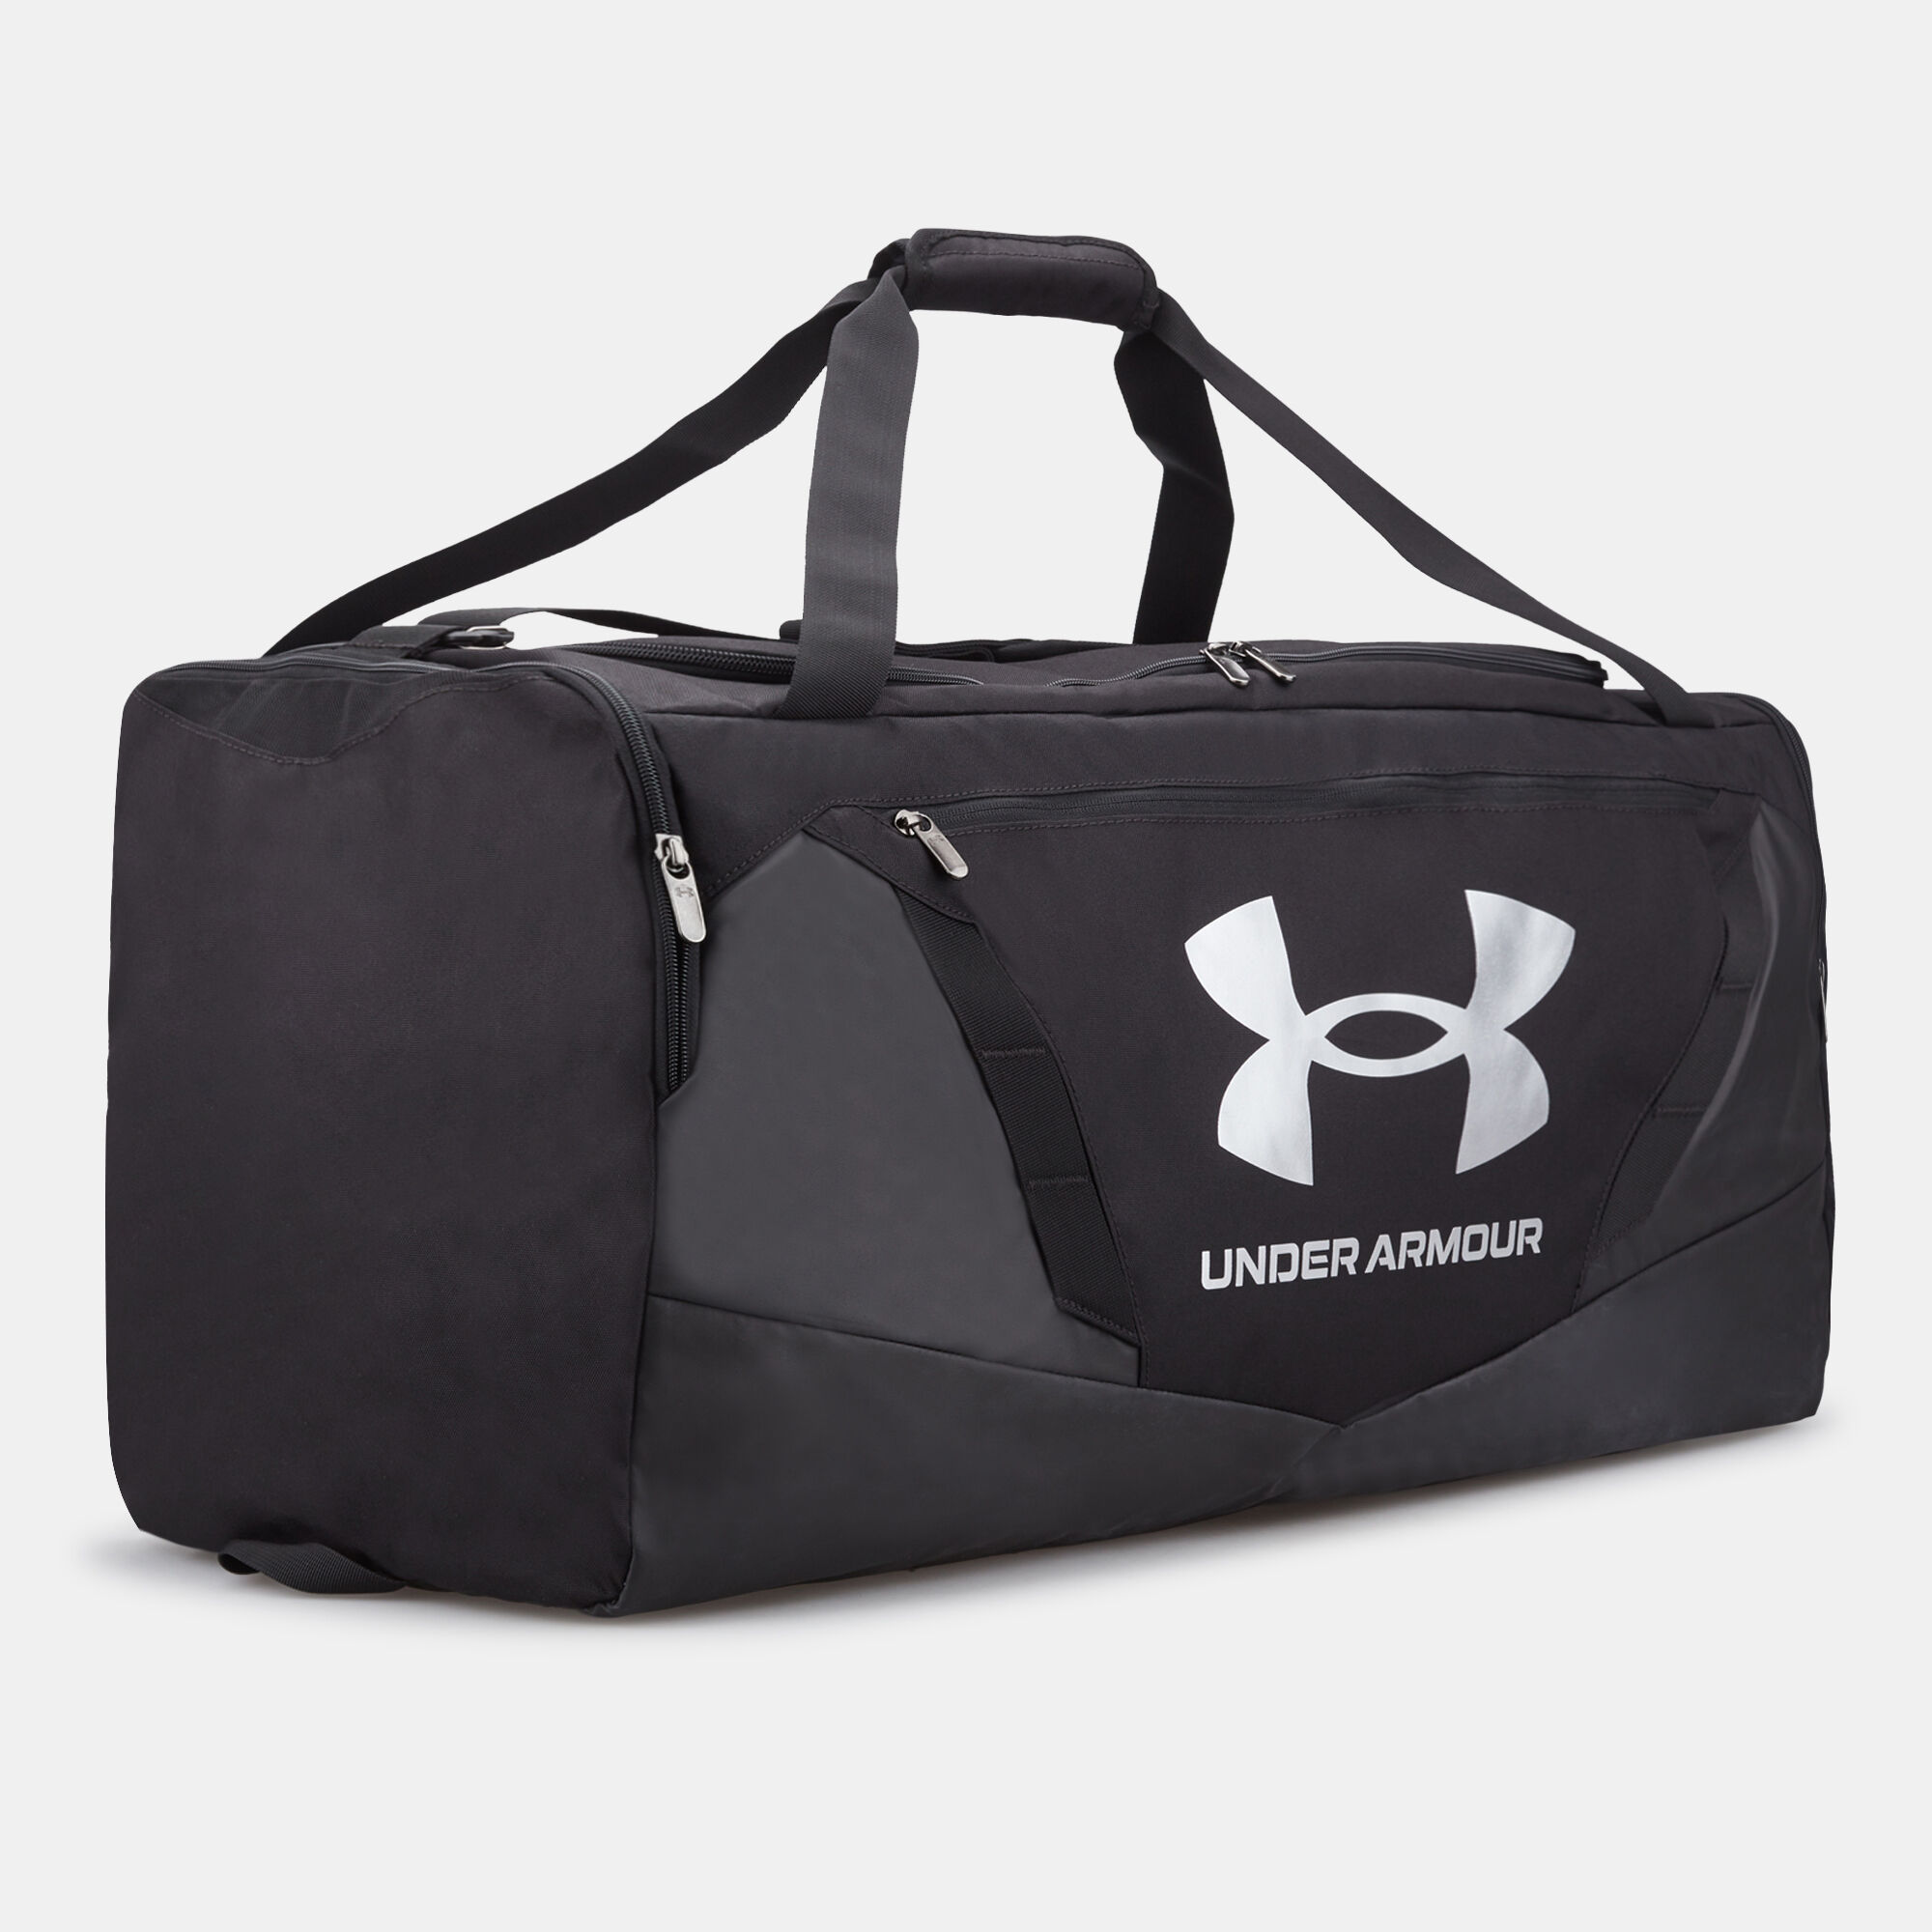 Under Armour Duffle Bag/Gym Bag/Travel Bag, Hobbies & Toys, Travel, Travel  Essentials & Accessories on Carousell